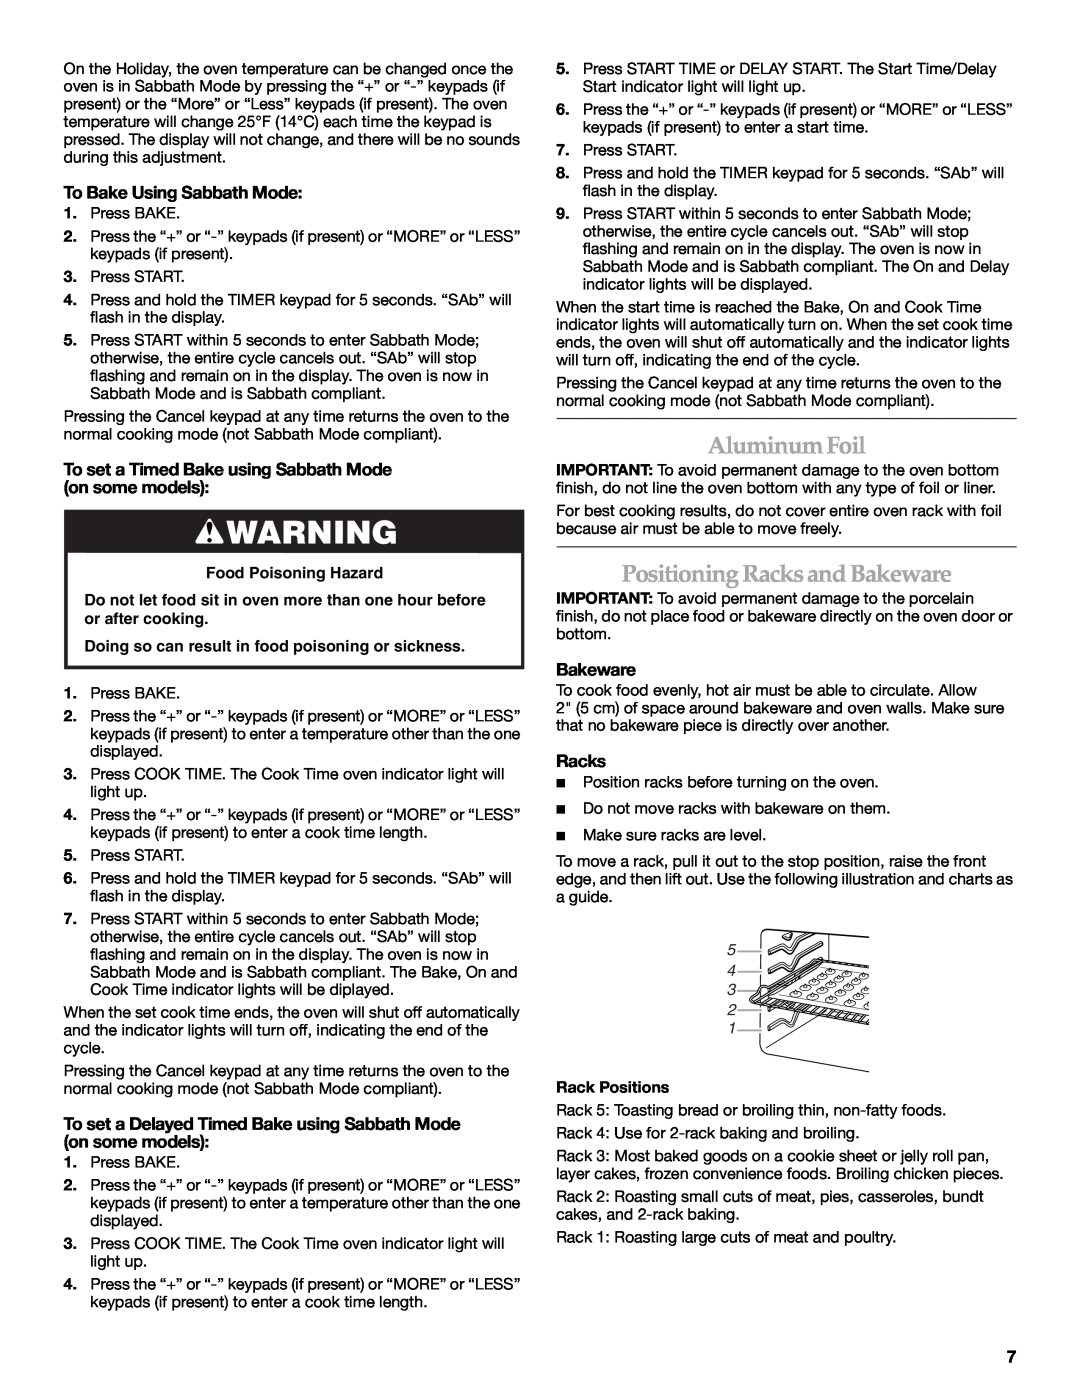 Maytag W10321012A warranty Aluminum Foil, Positioning Racks and Bakeware, To Bake Using Sabbath Mode, Food Poisoning Hazard 